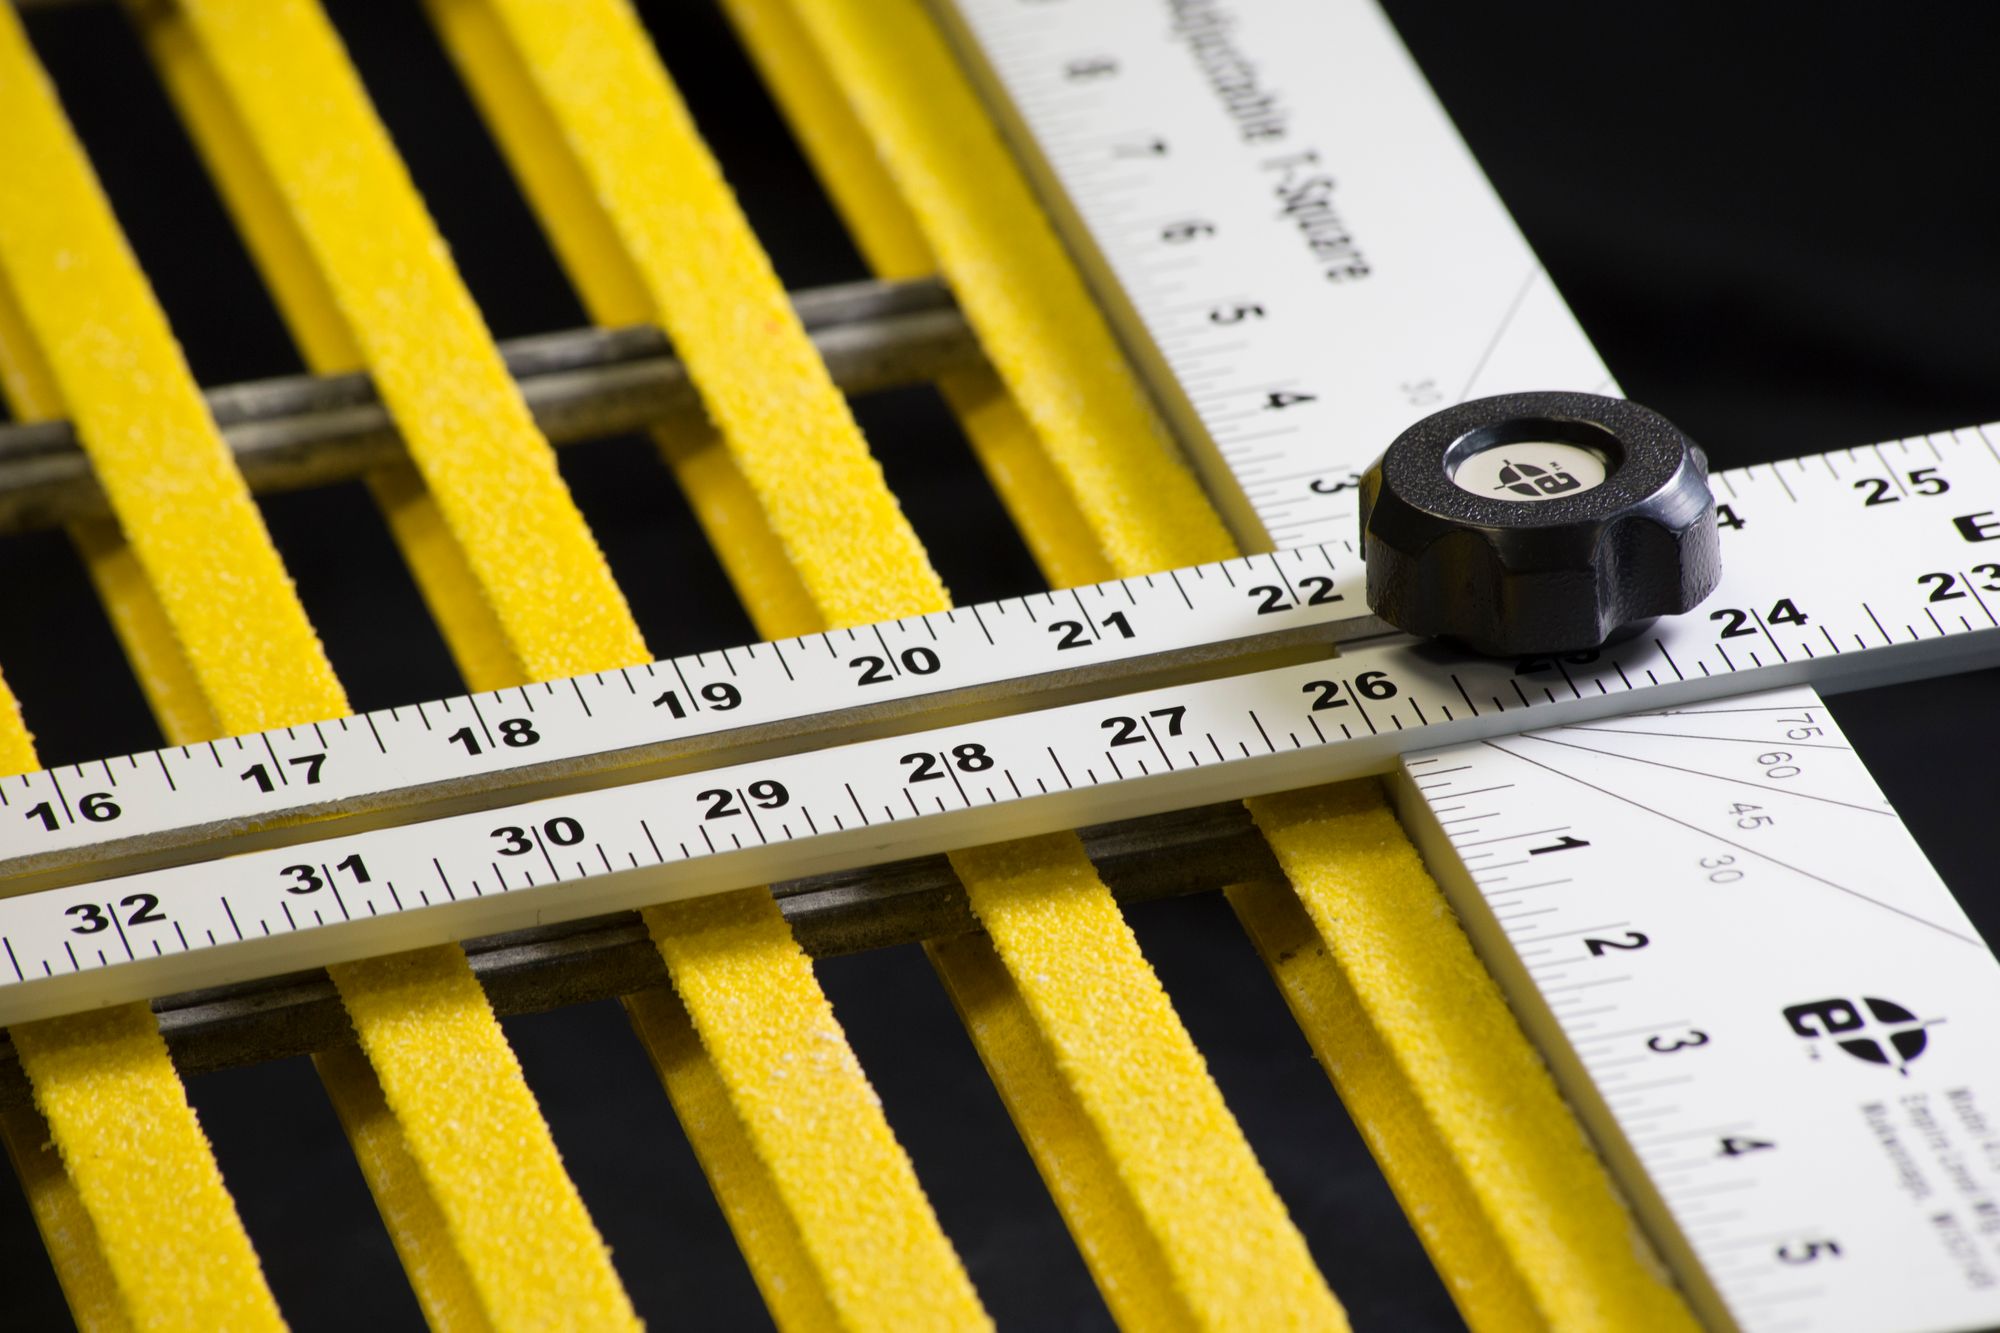 A closeup image of a measuring tool being used to prep for cutting Fiberglass Grating to size.